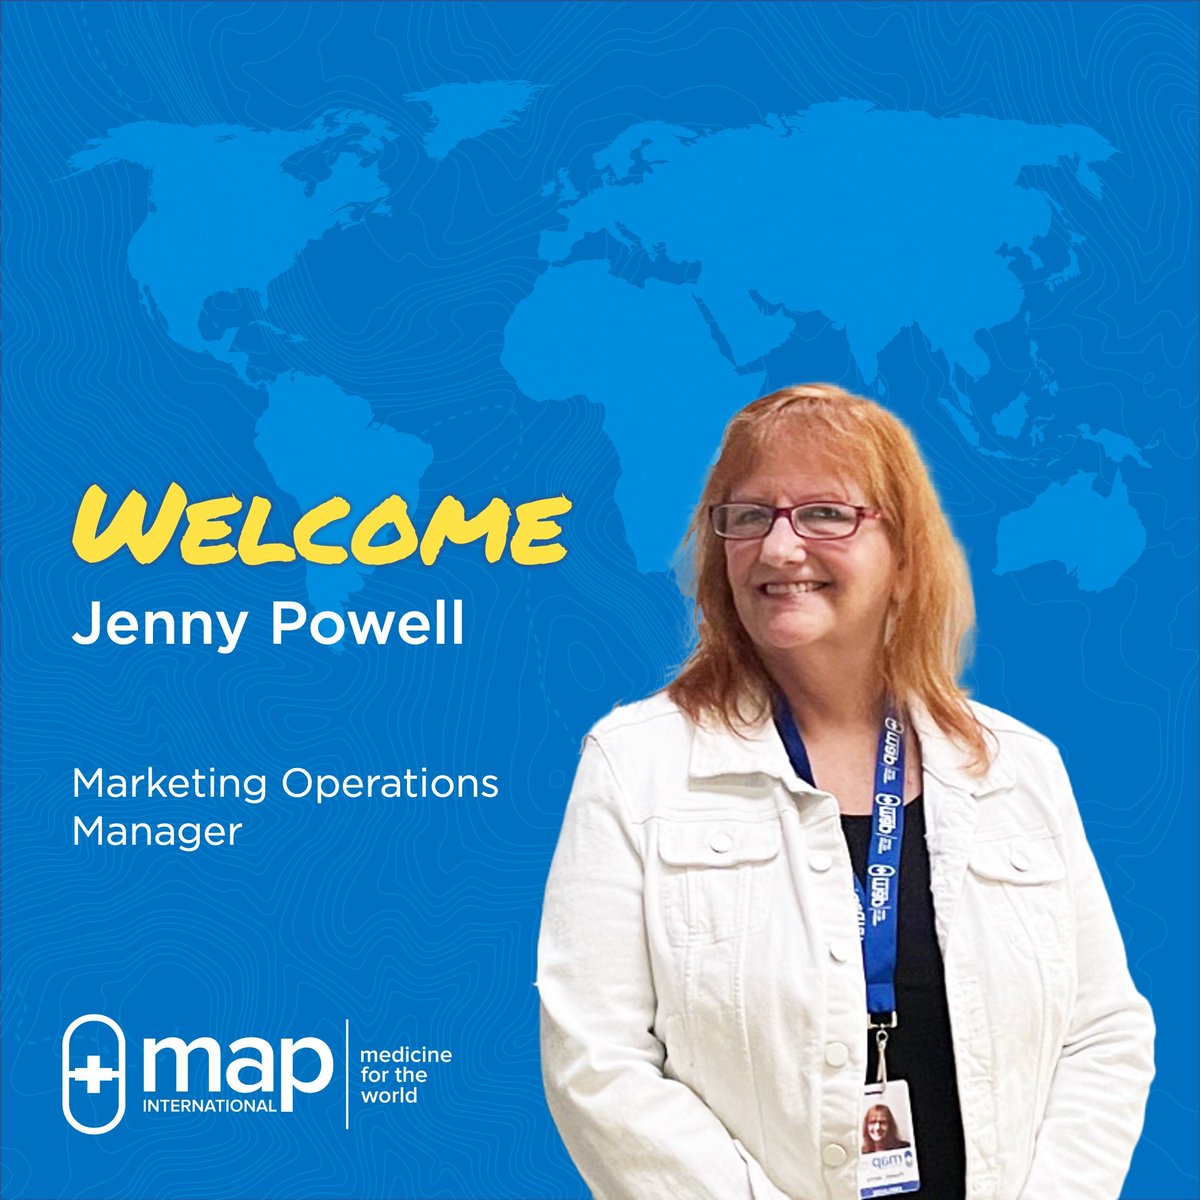 Welcome to MAP's new Marketing Operations Manager, Jenny Powell! 

Jenny brings over 25 years of experience in marketing to her new role where she will help share the MAP story through day-to-day operations and campaign management. https://t.co/3vP82plLhb